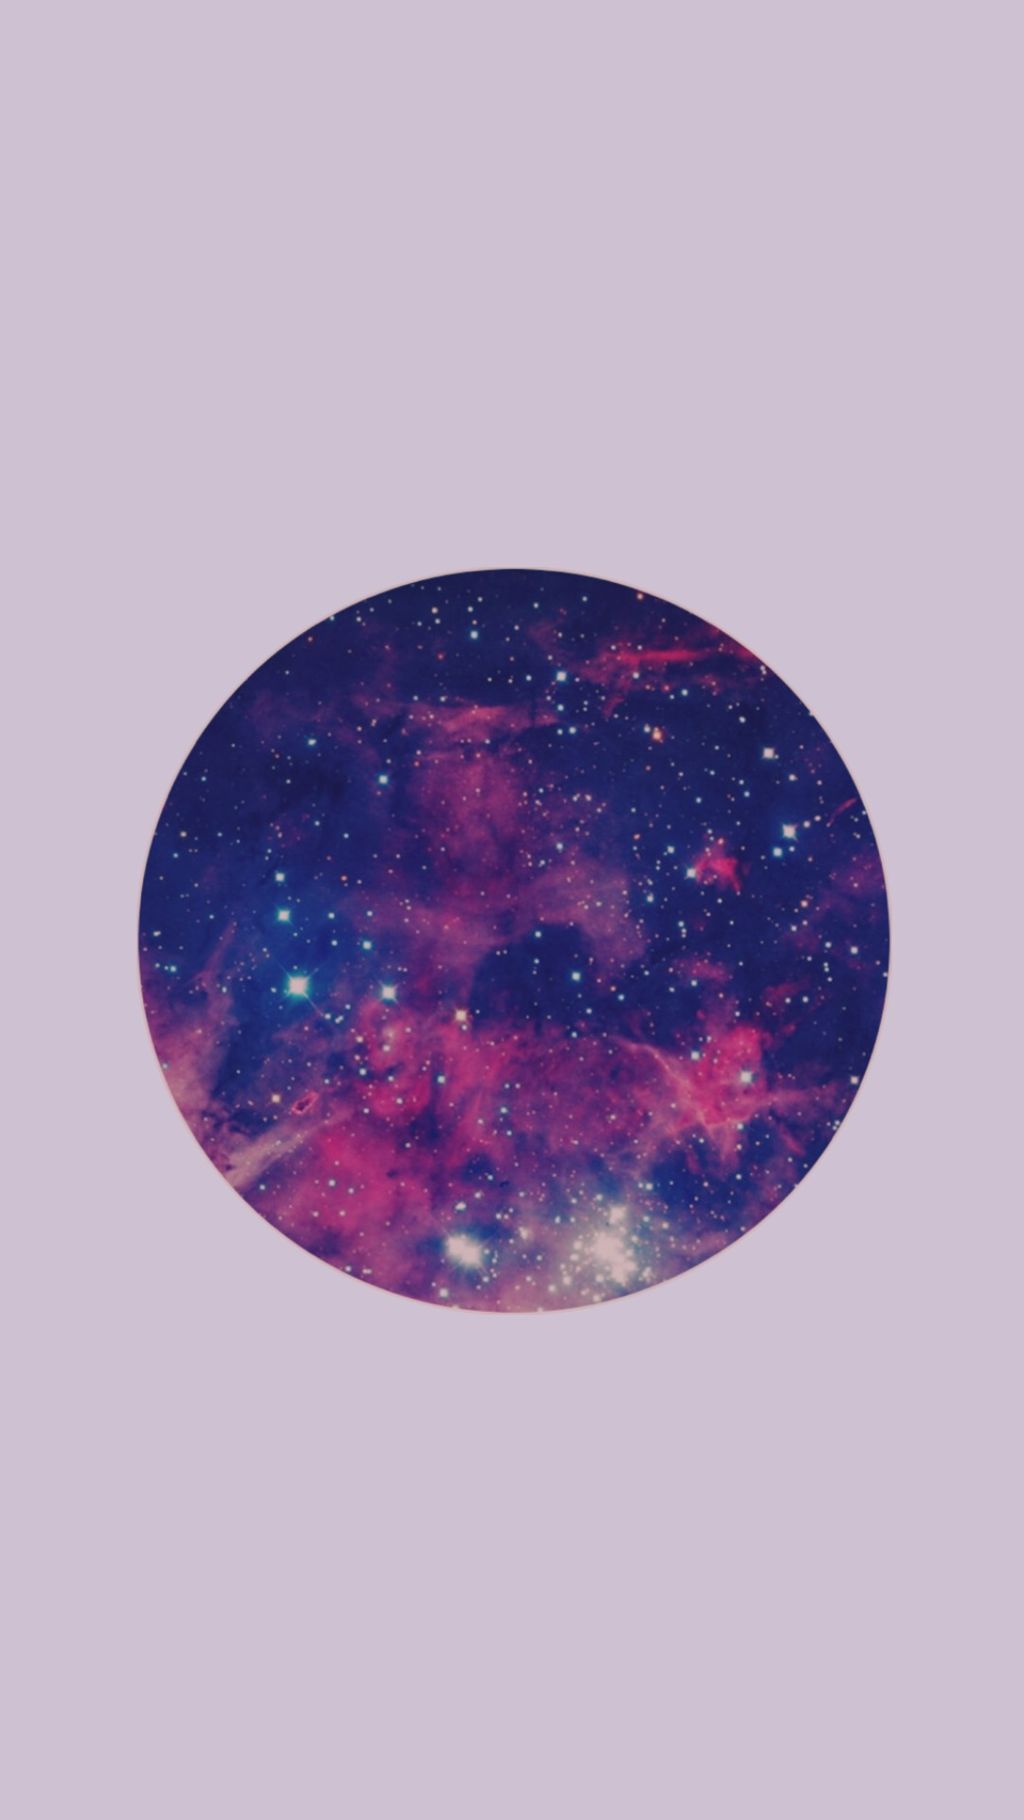 Pastel Aesthetic Galaxy Background Hd